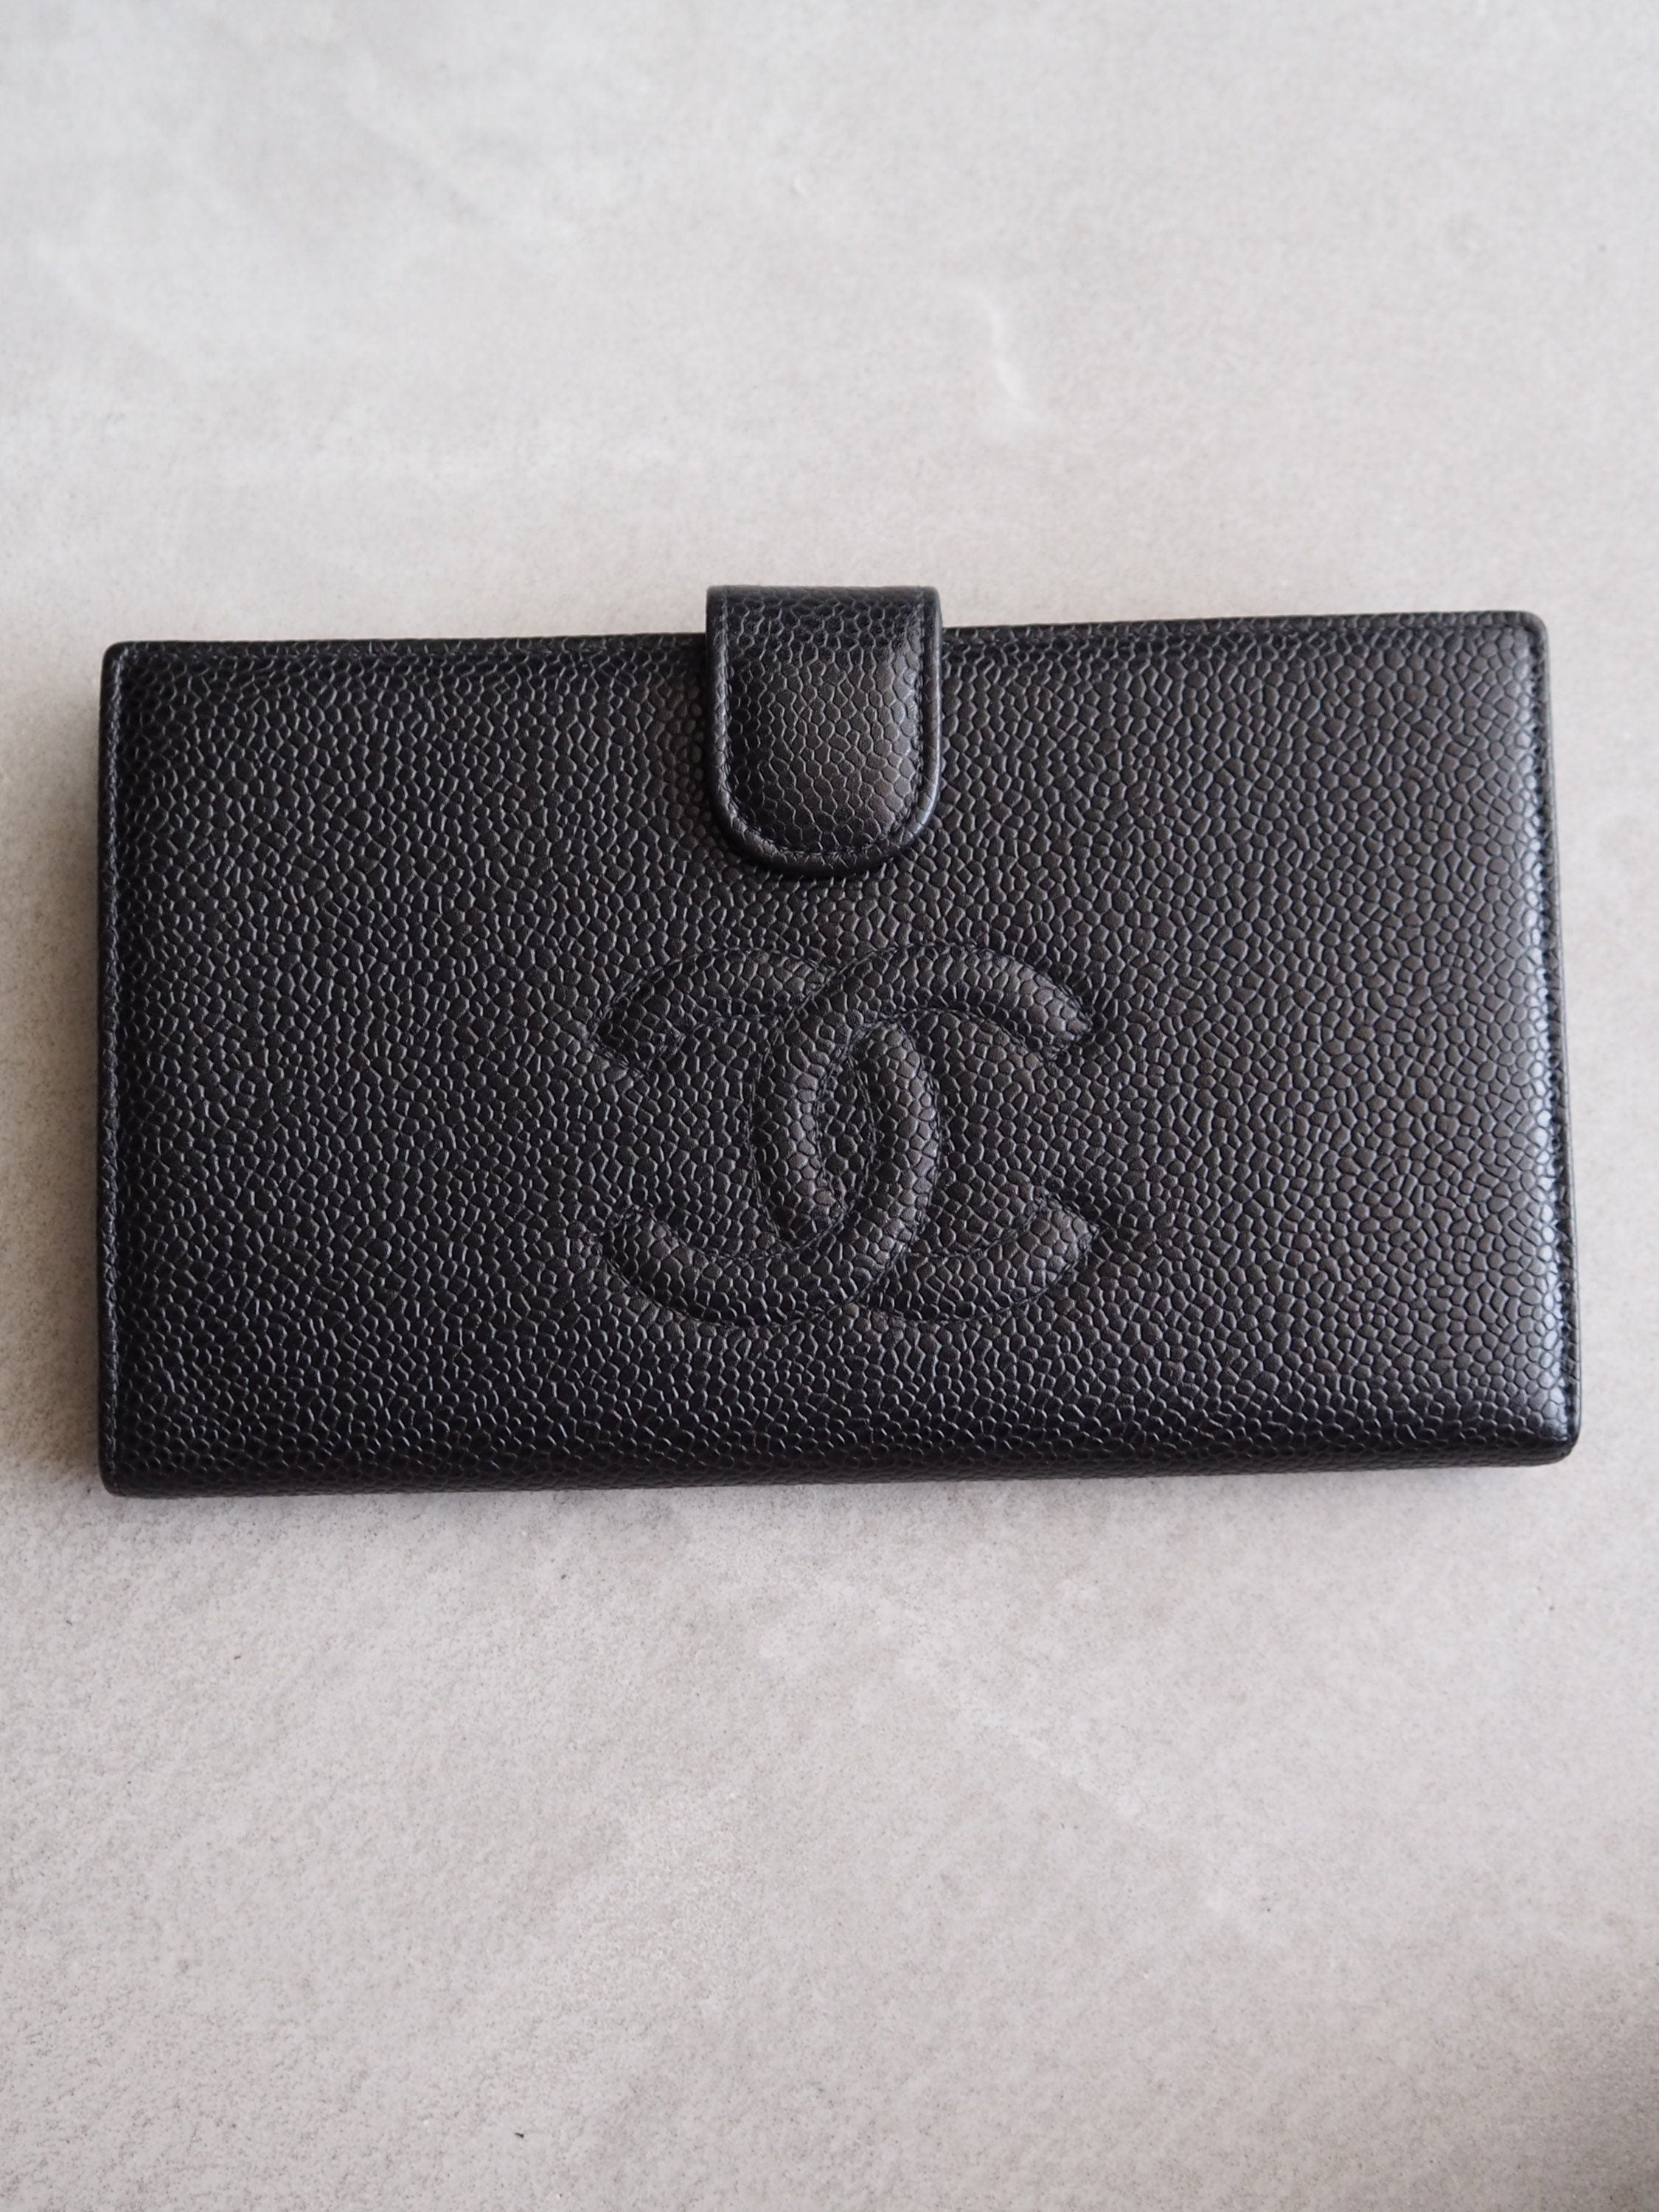 CHANEL COCO Long Wallet Purse Caviar Skin Leather Black Authentic Vintage Box